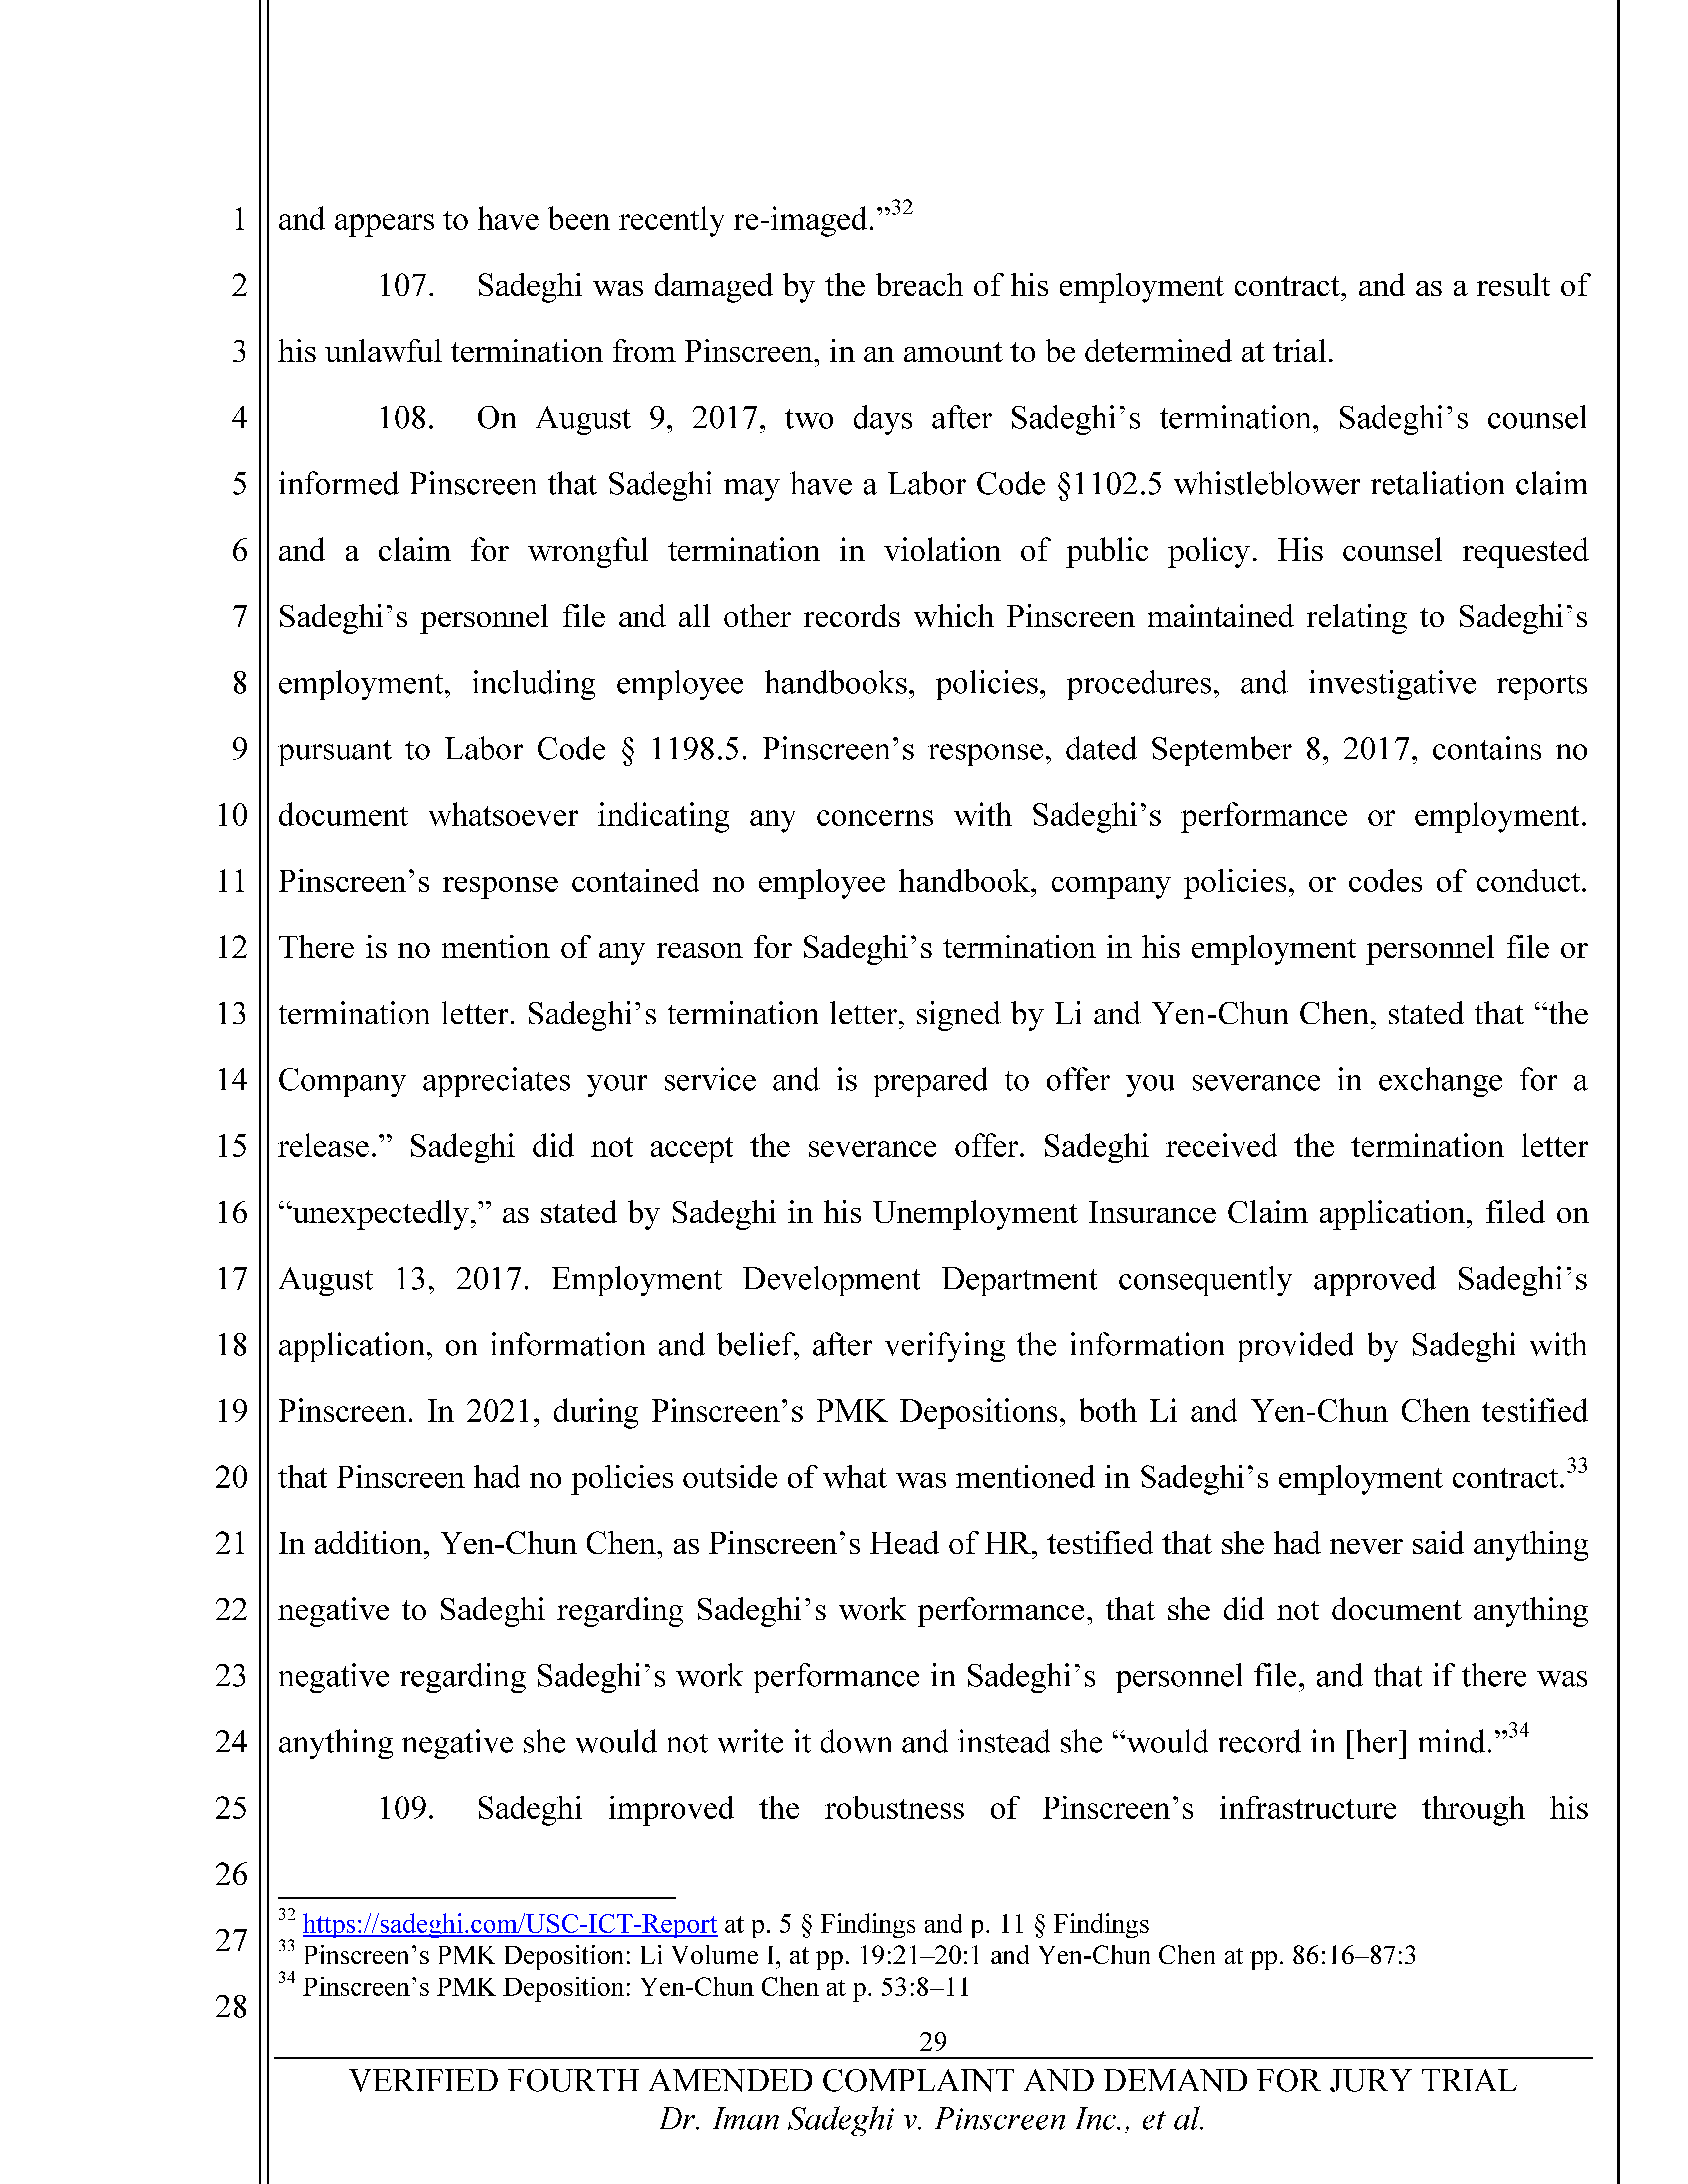 Fourth Amended Complaint (4AC) Page 30